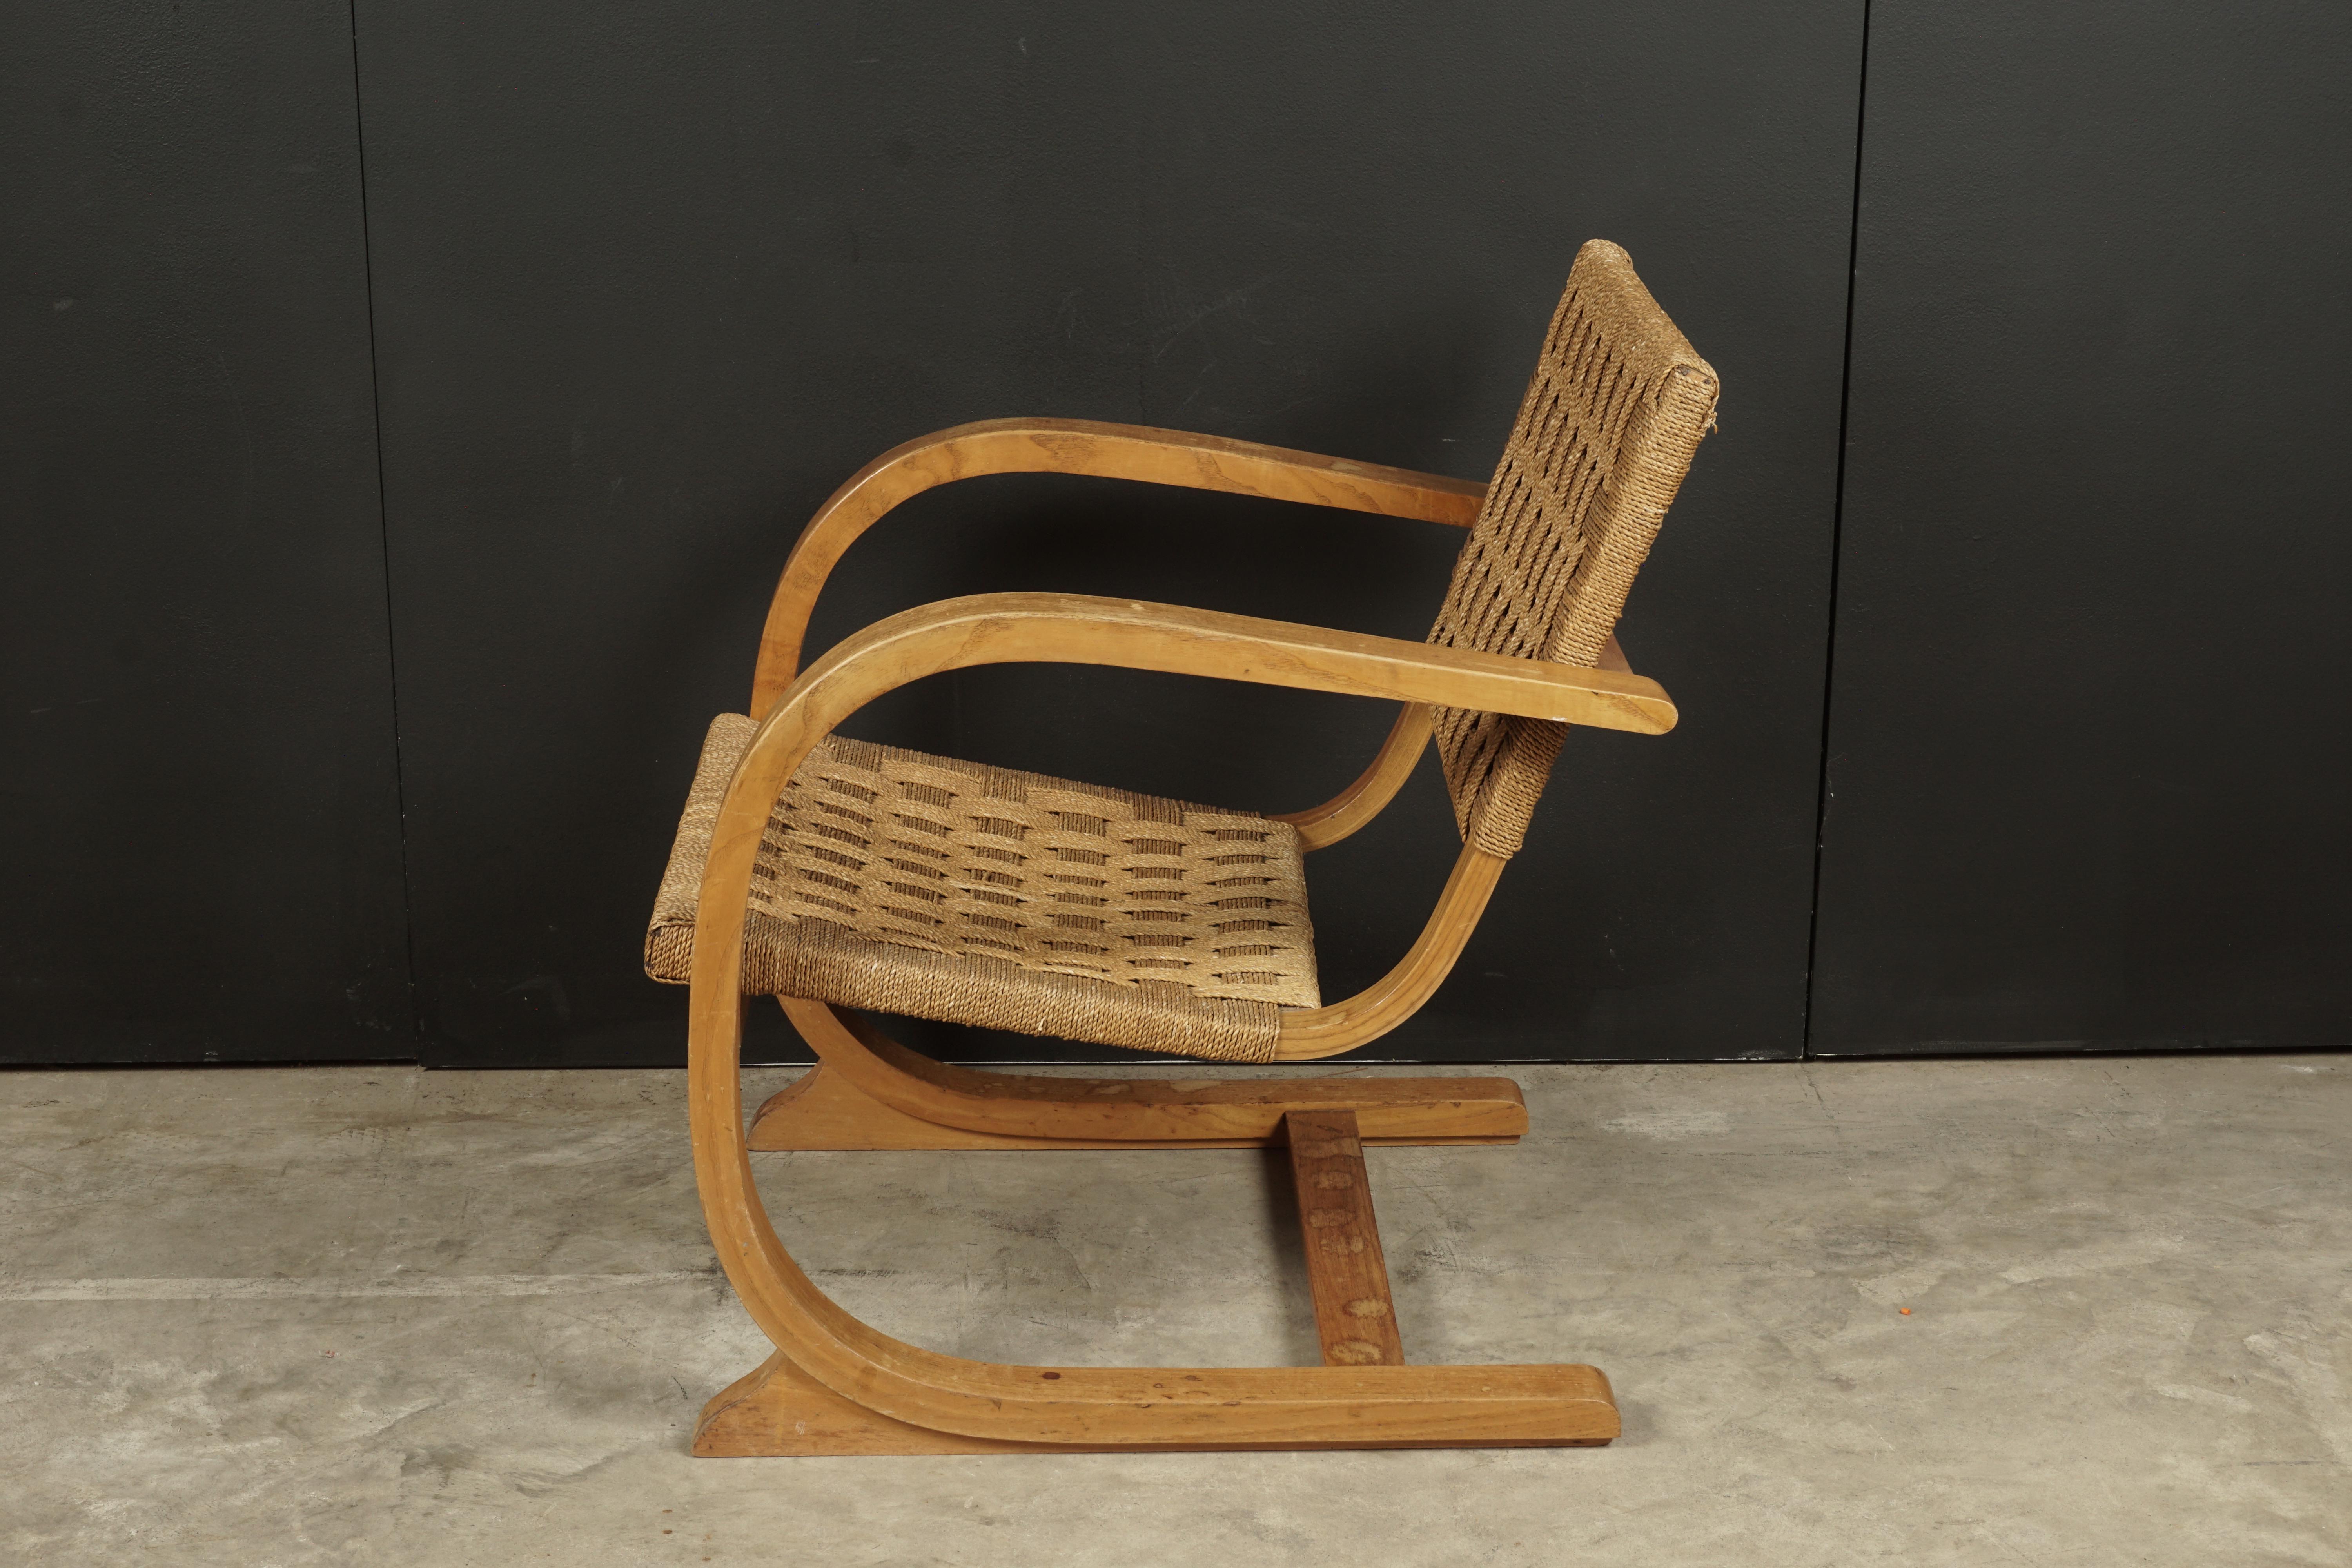 Vintage midcentury woven lounge chair designed by Bas Van Pelt, Netherlands. Bent oakwood frame with braided rope on the seat and back.